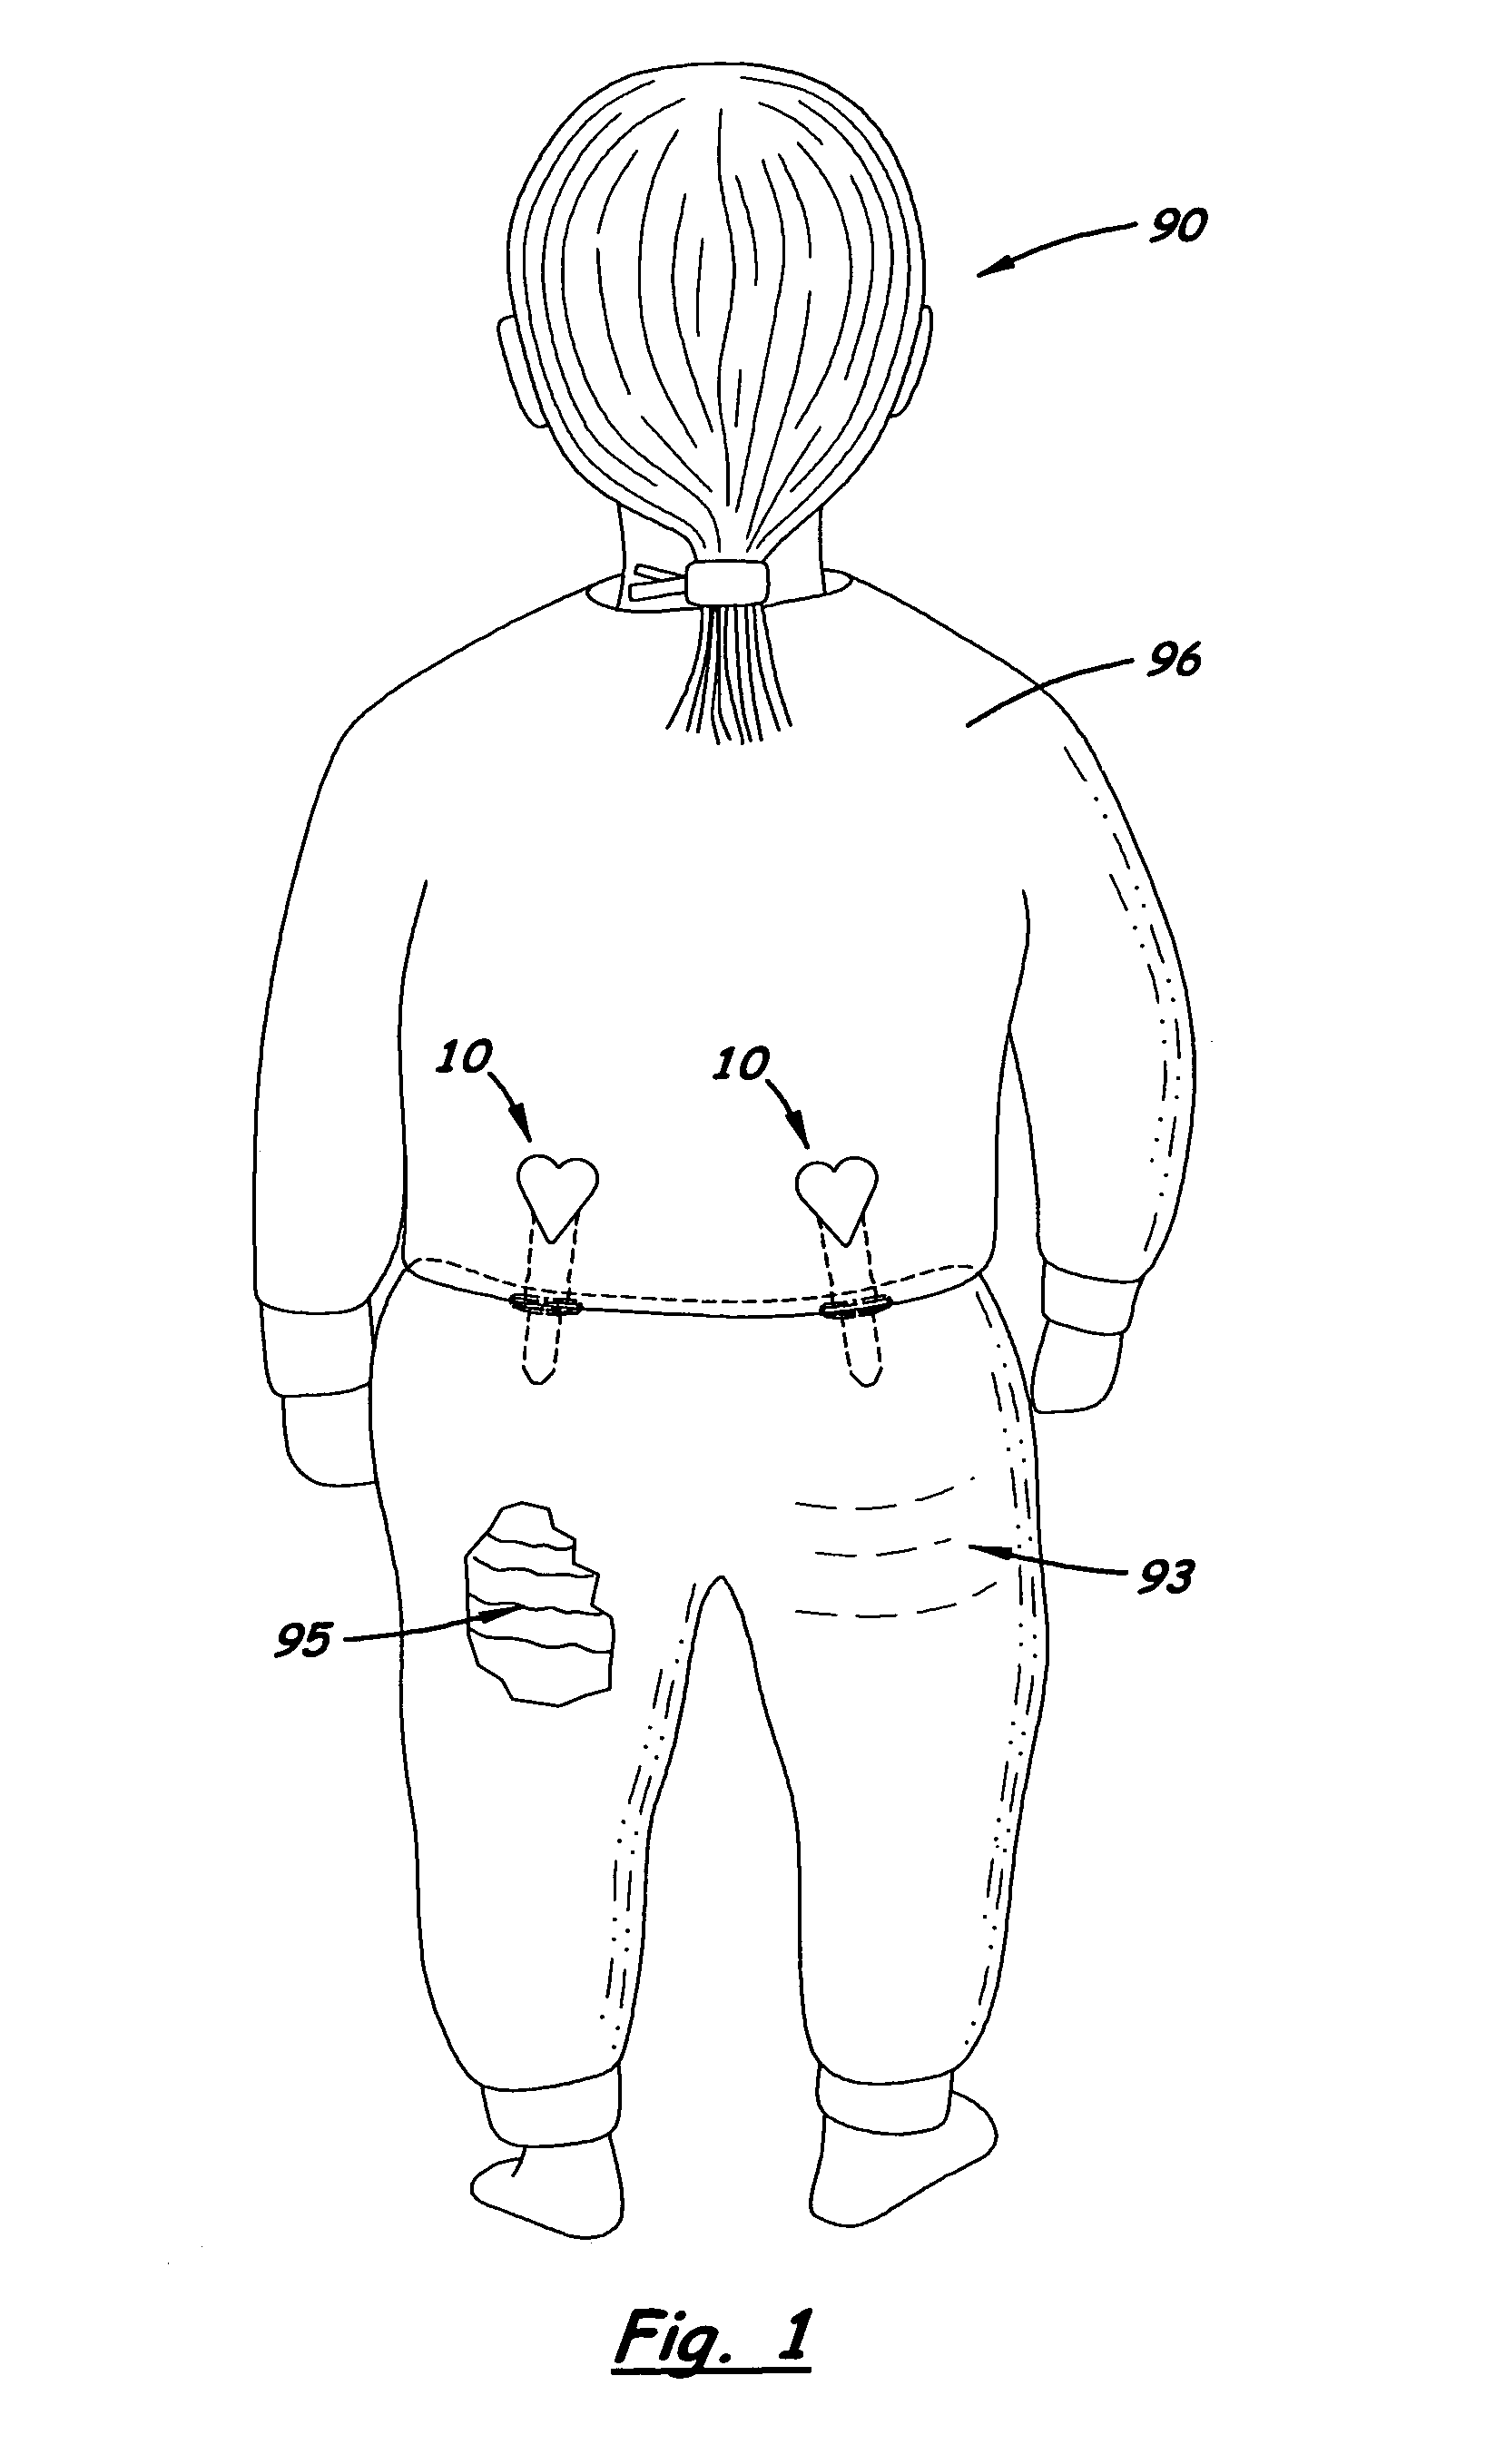 Garment strap assembly and pants holding method